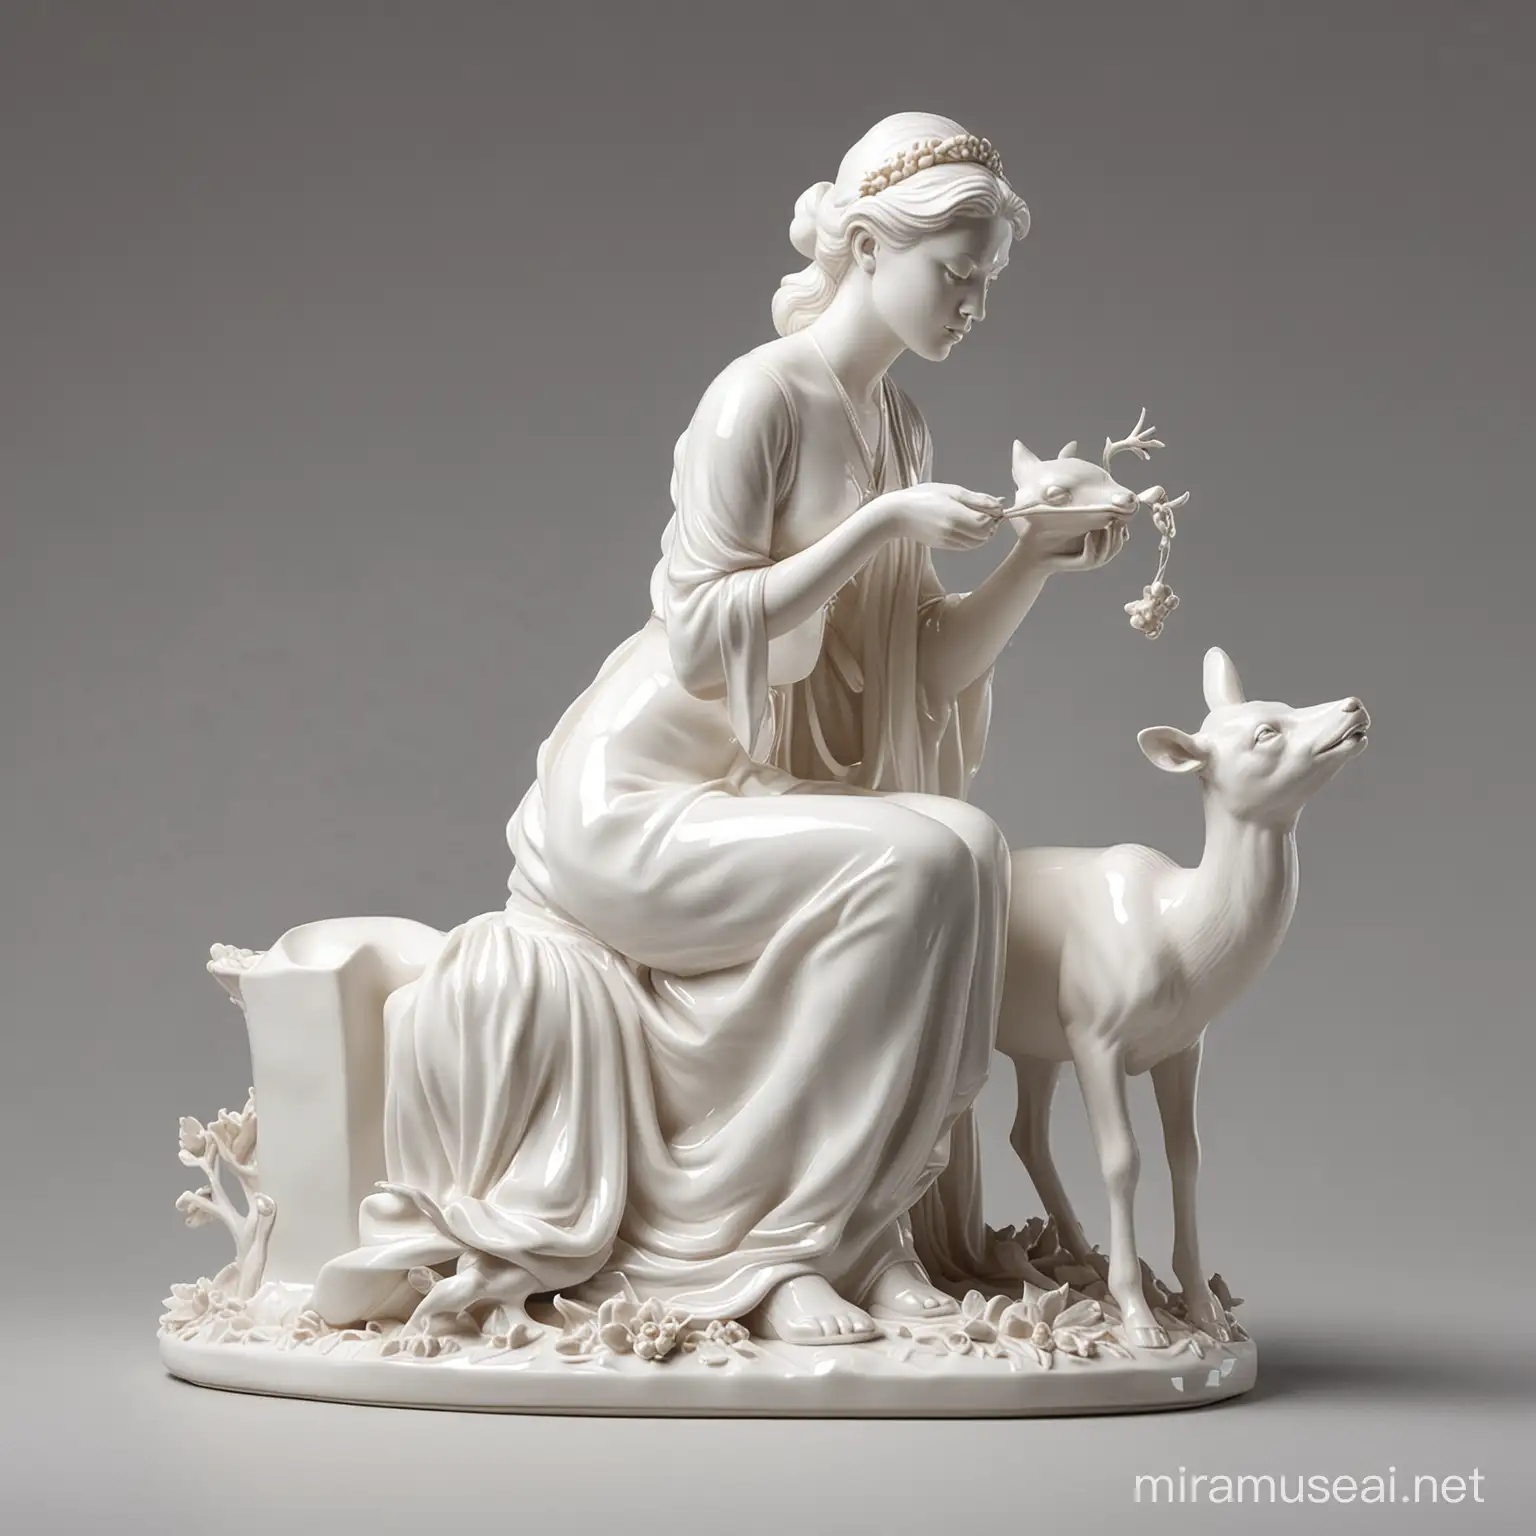 Glossy white porcelain figurine of a seated woman feeding a deer, product photo style